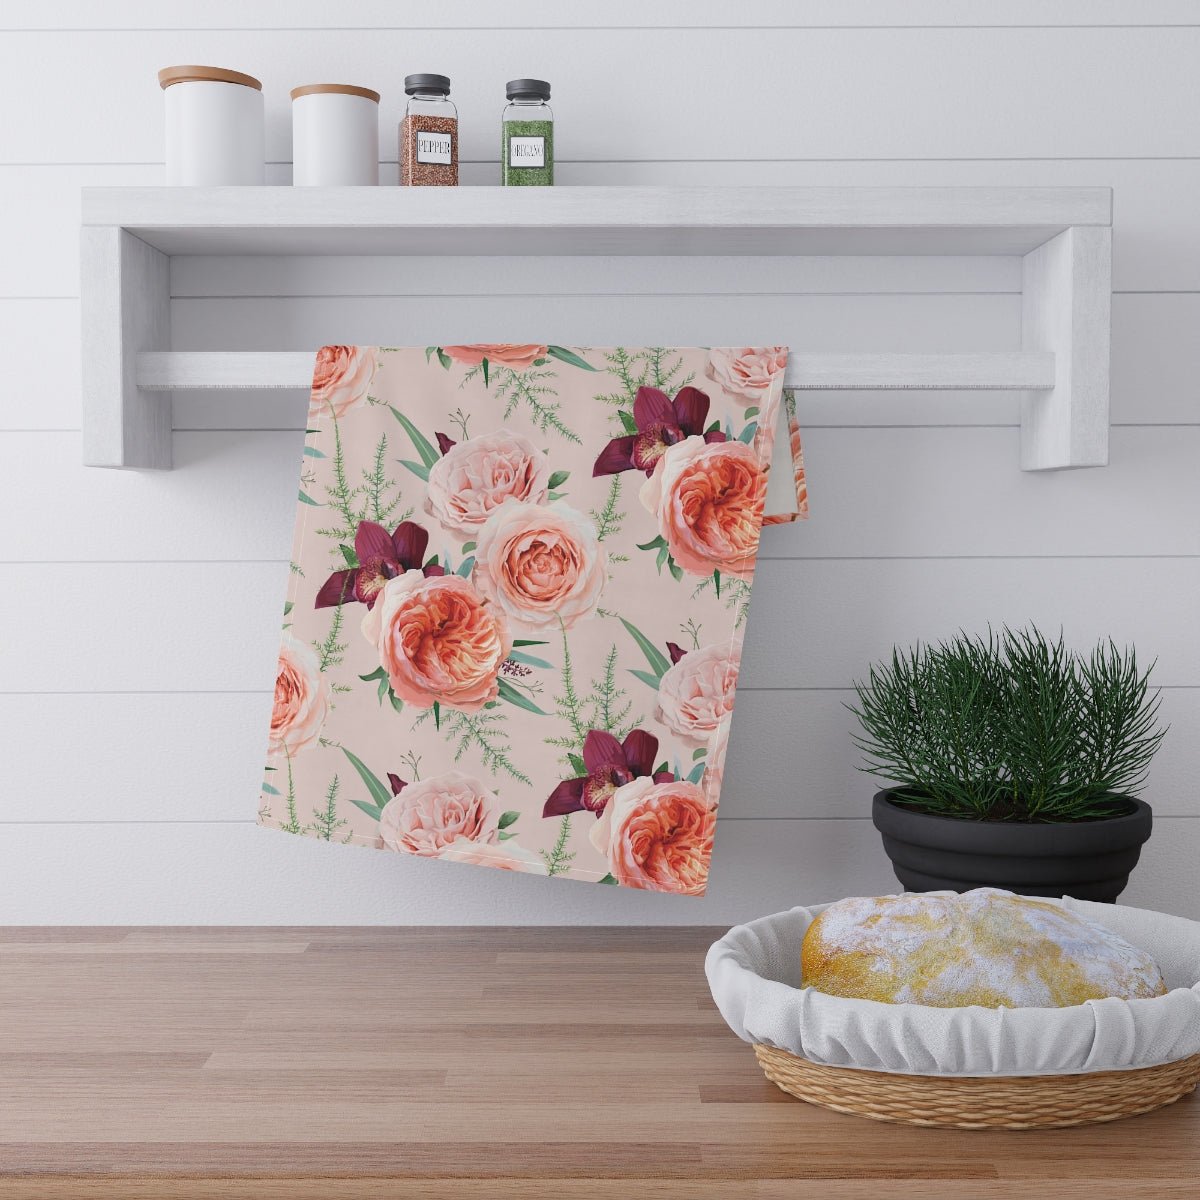 Blush Roses Kitchen Towel - Puffin Lime